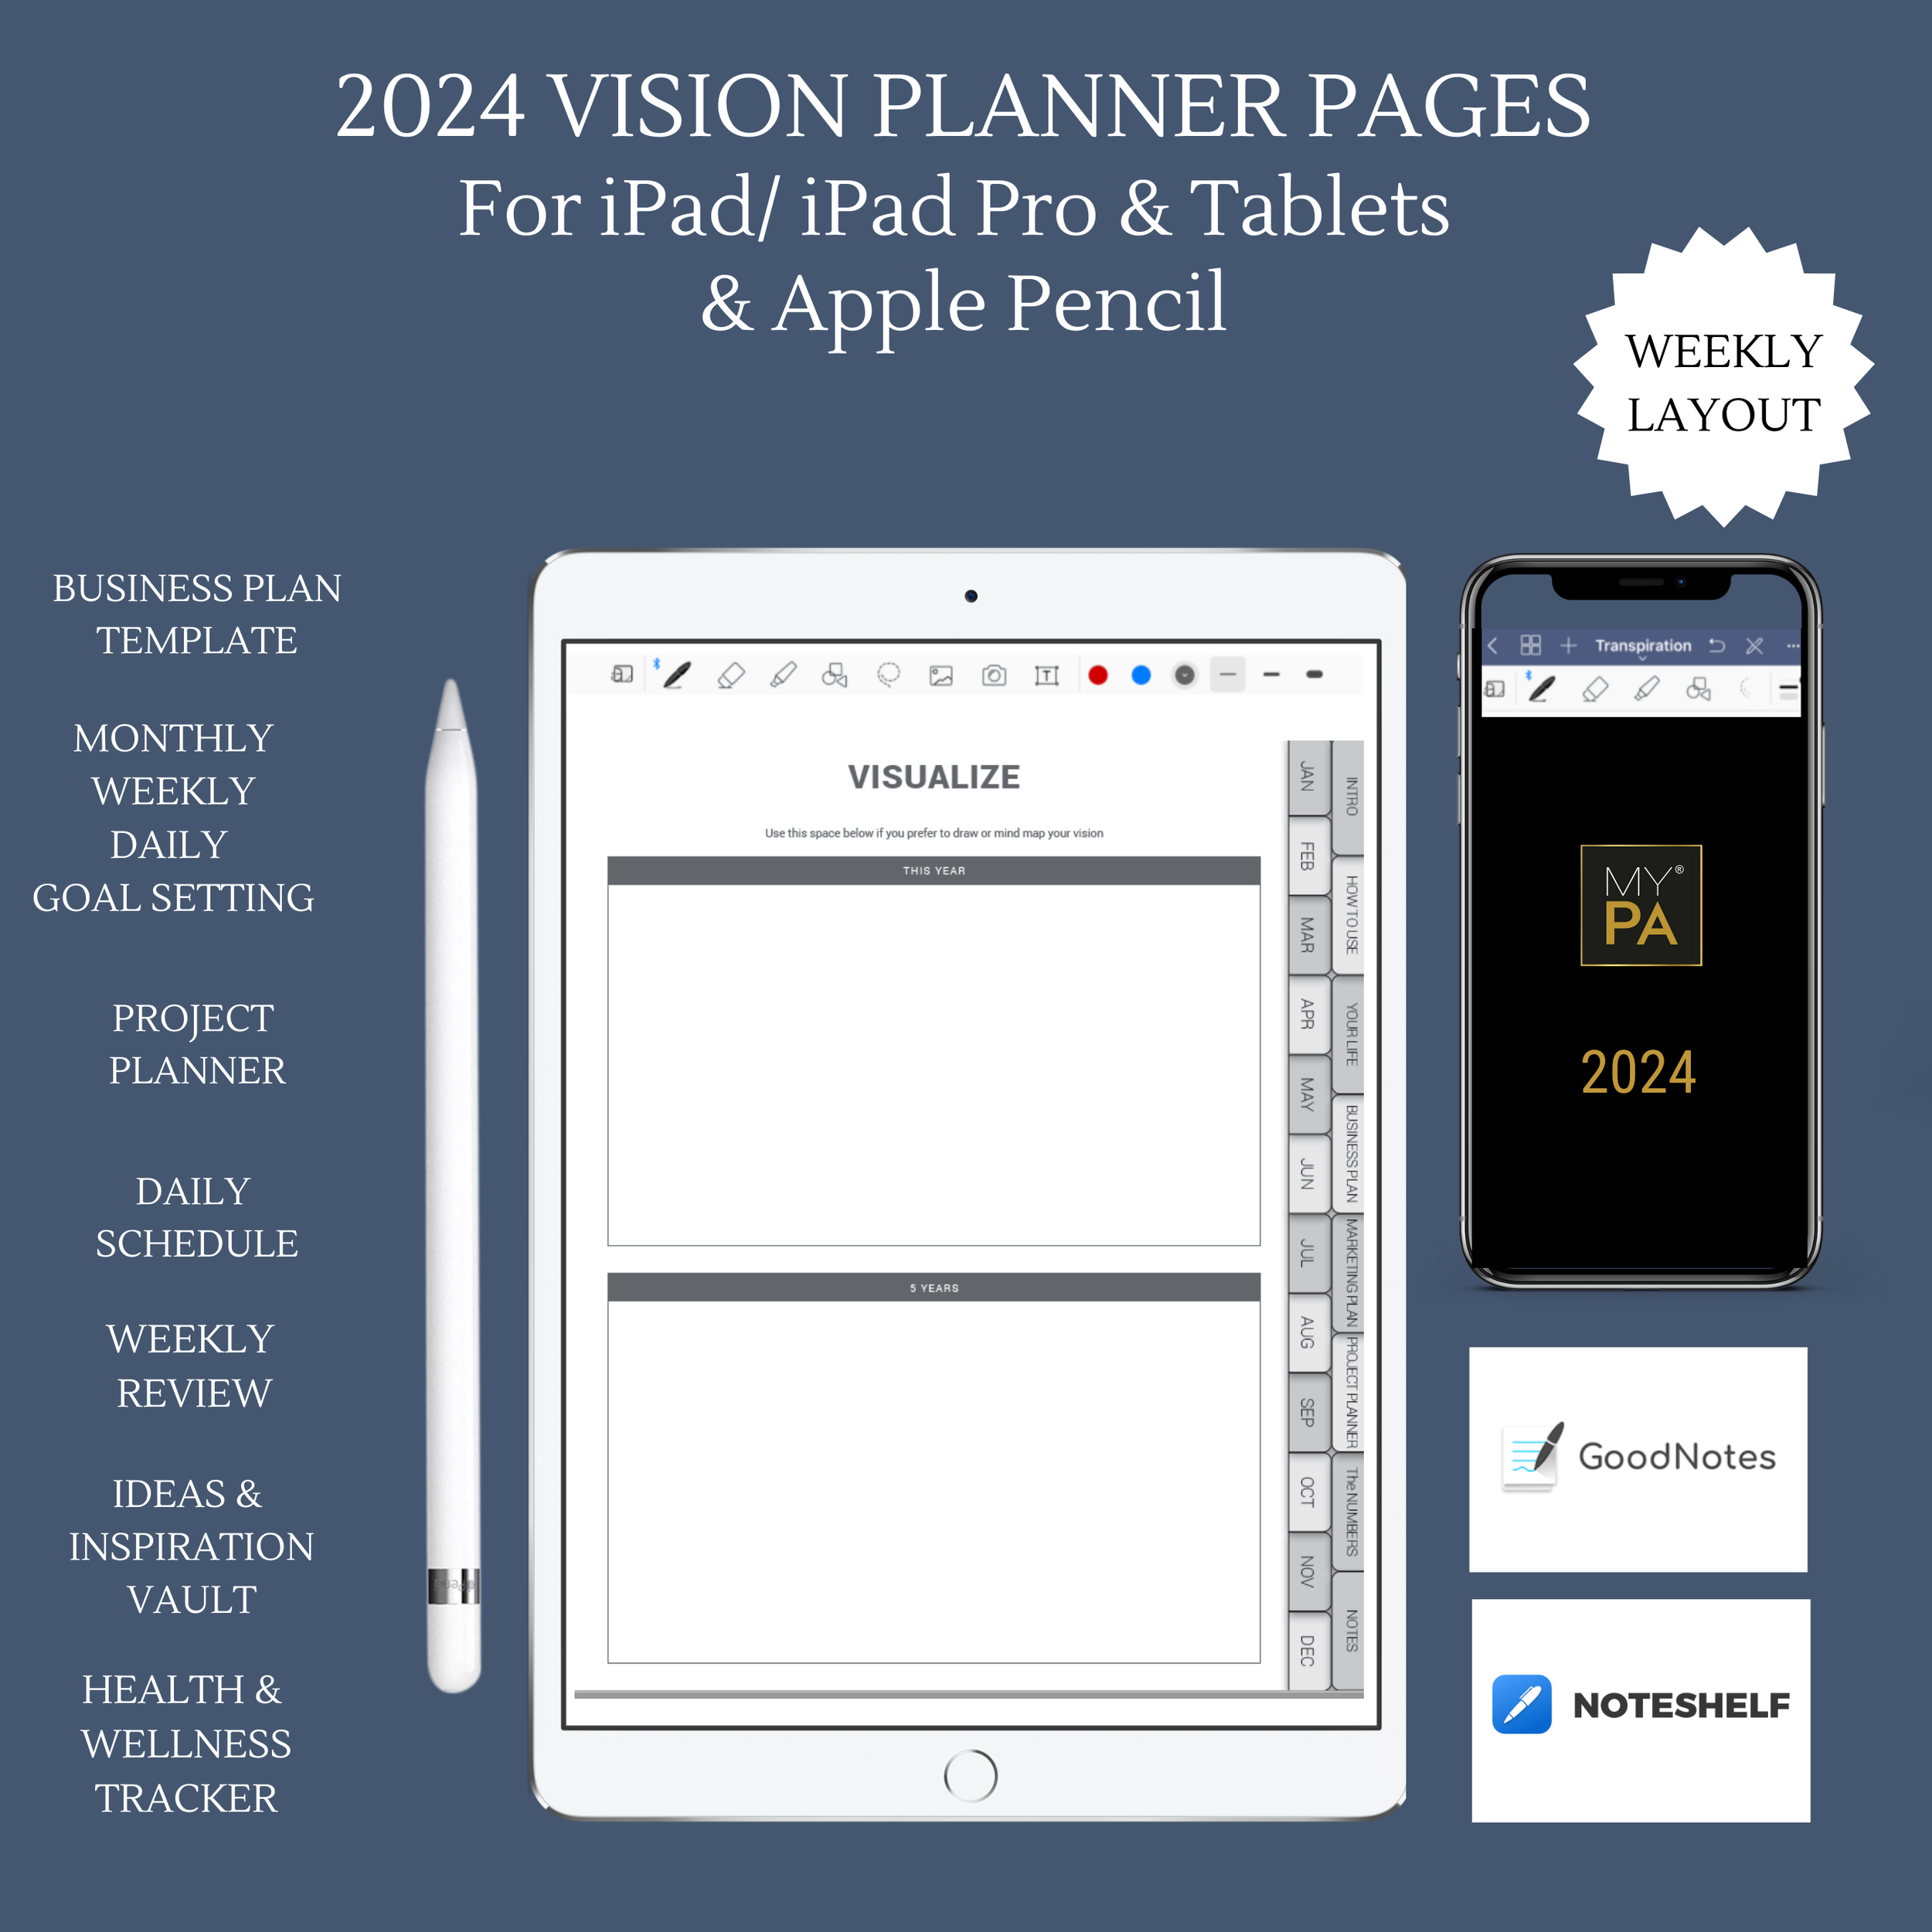 MY PA 2024 Planner & The Digital Version for iPad, iPad Pro & Tablets